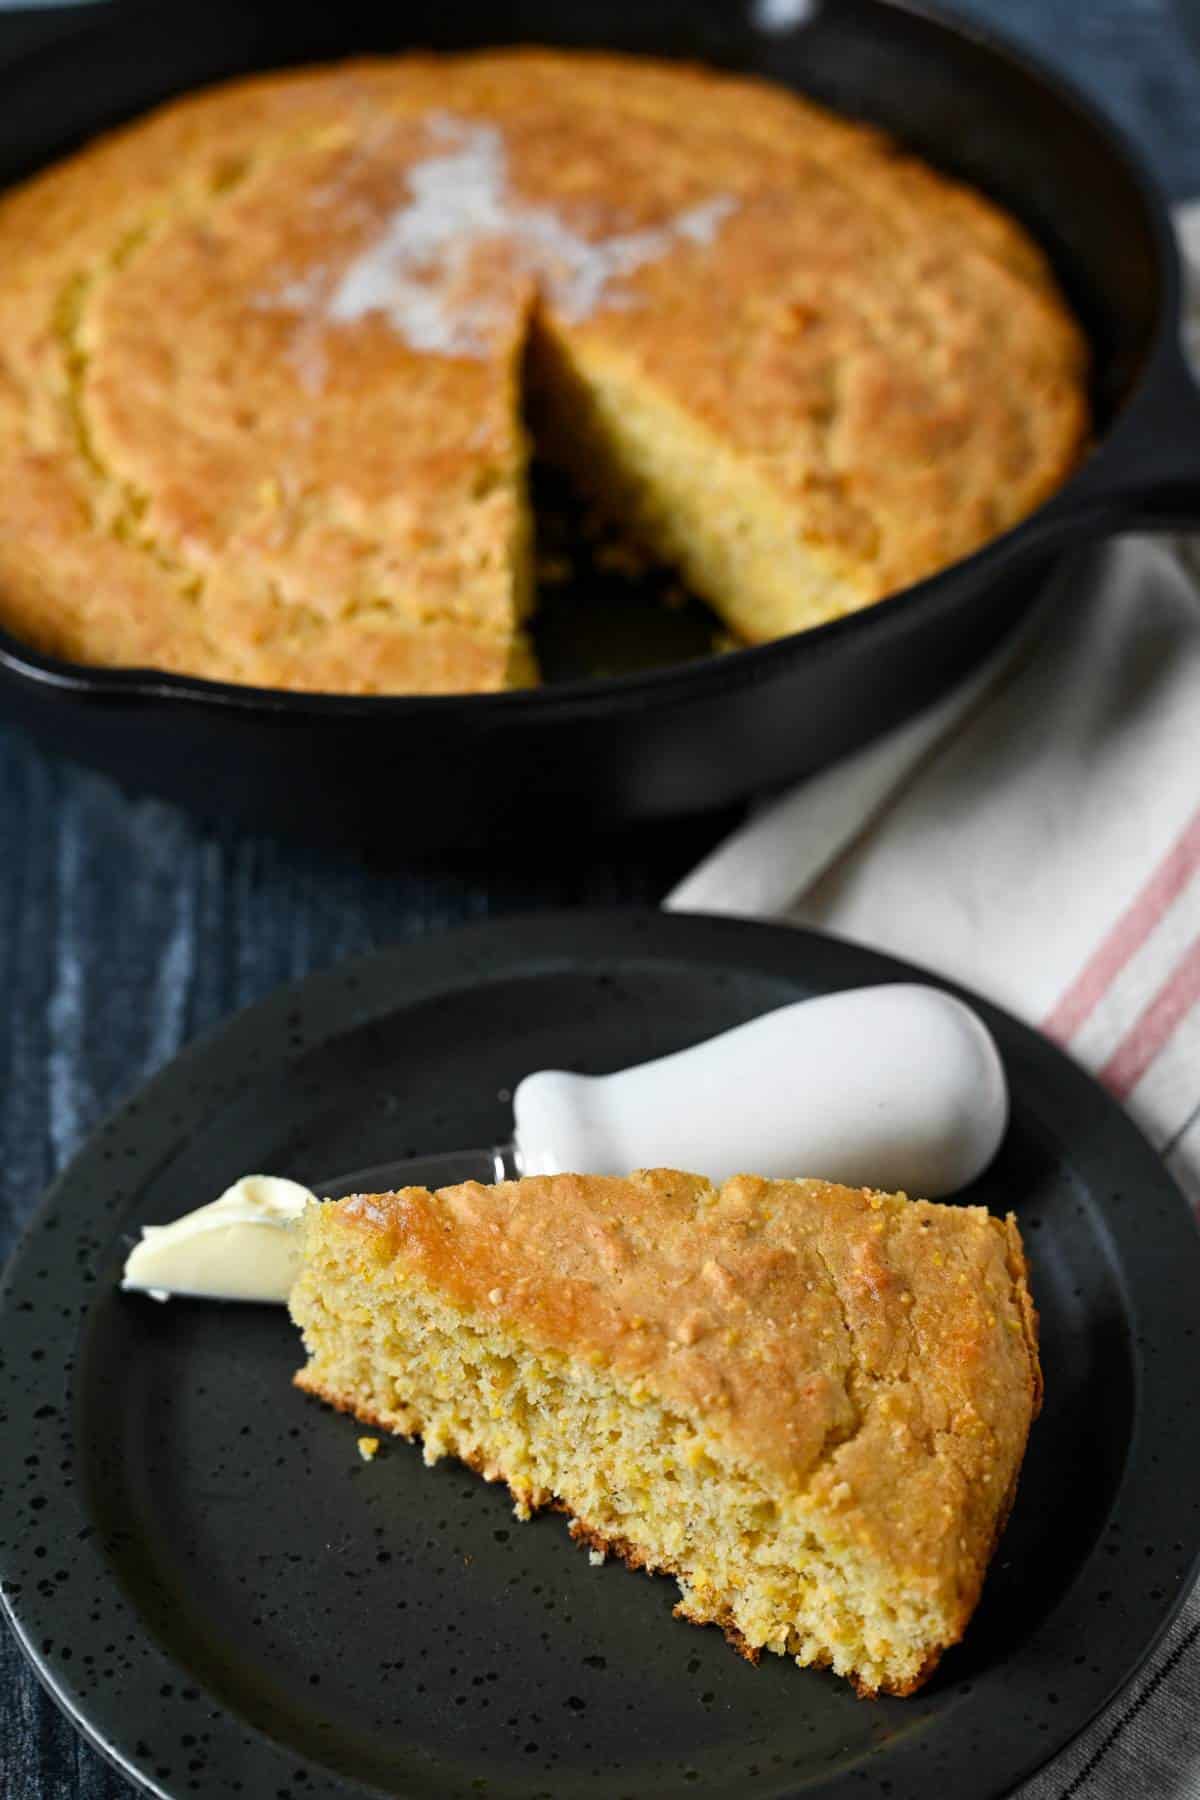 slice of cornbread on a plate with a cast iron skillet of cornbread behind it